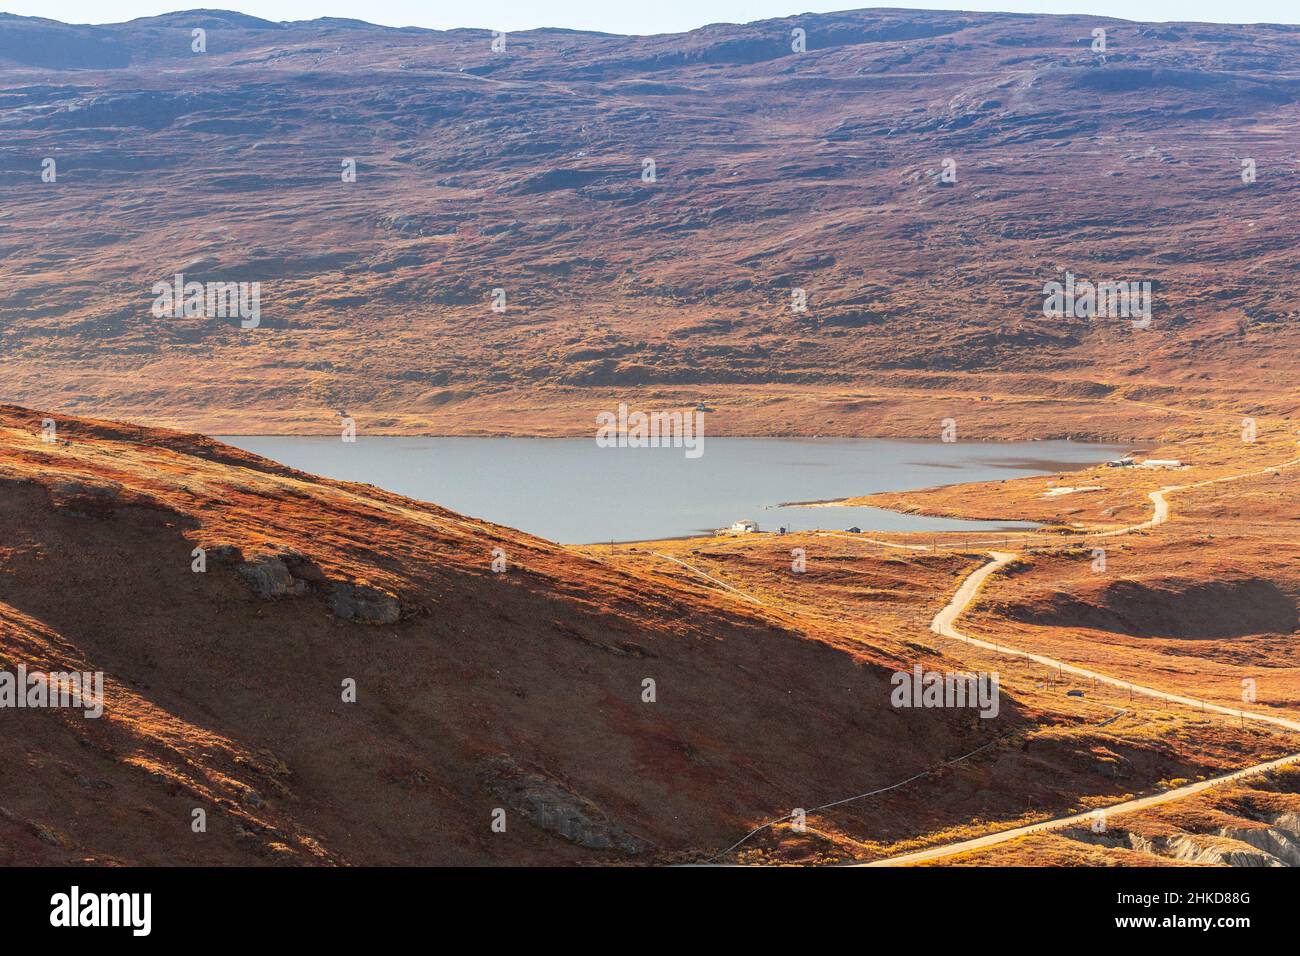 Autumn greenlandic orange tundra landscape with road to the lake and mountains in the background, Kangerlussuaq, Greenland Stock Photo